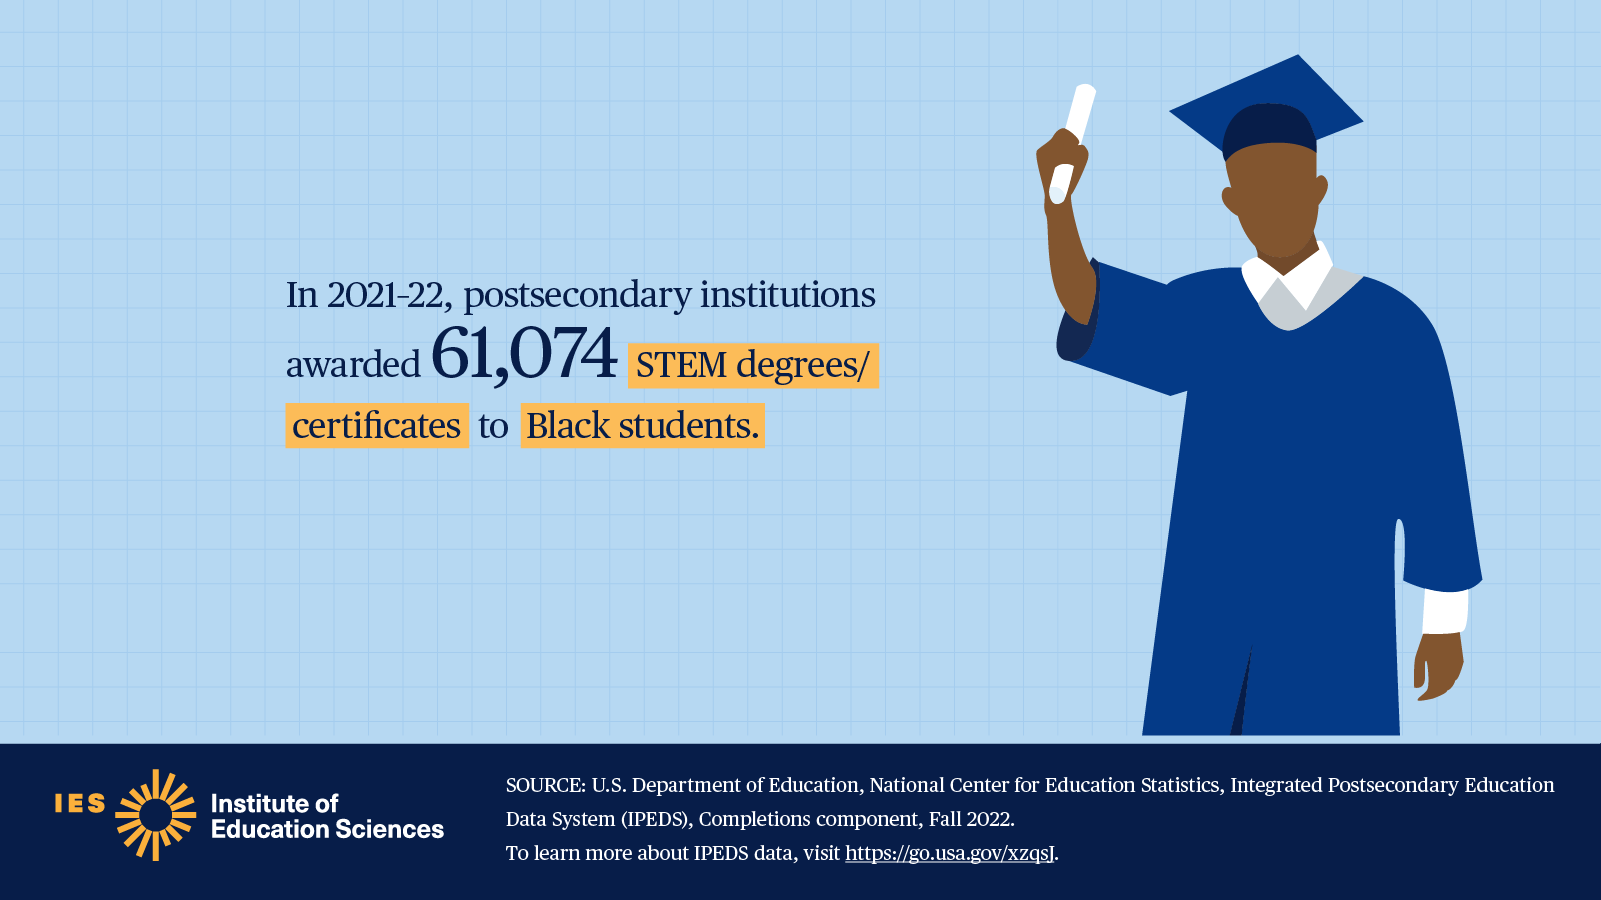 In 2021–22, postsecondary institutions awarded 61,074 STEM degrees/certificates to Black students.